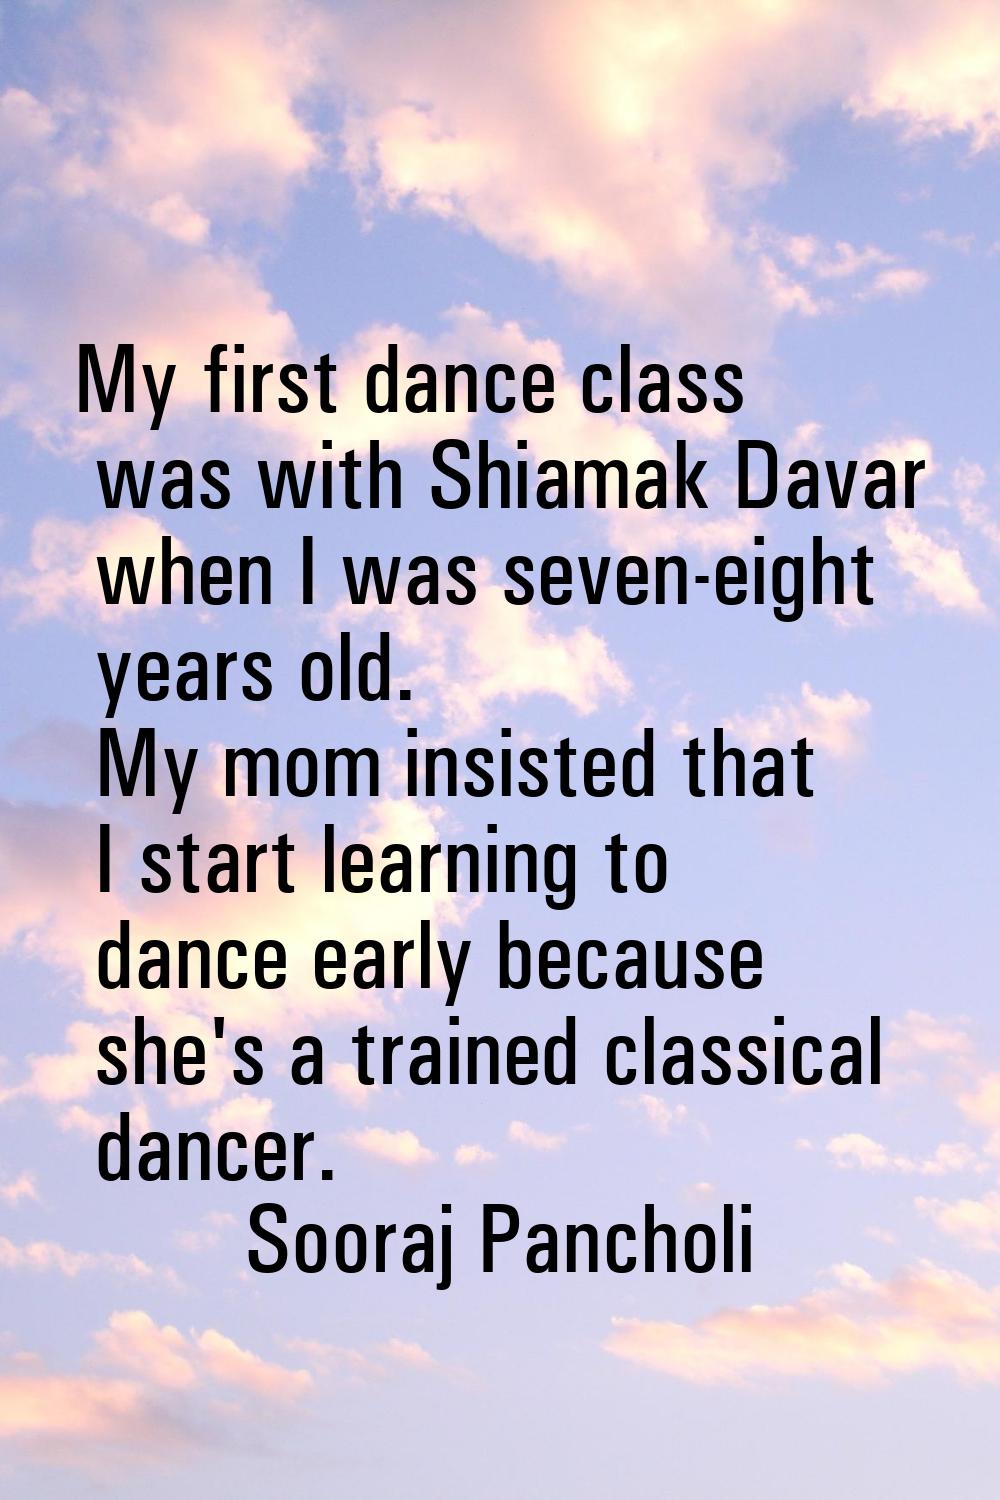 My first dance class was with Shiamak Davar when I was seven-eight years old. My mom insisted that 